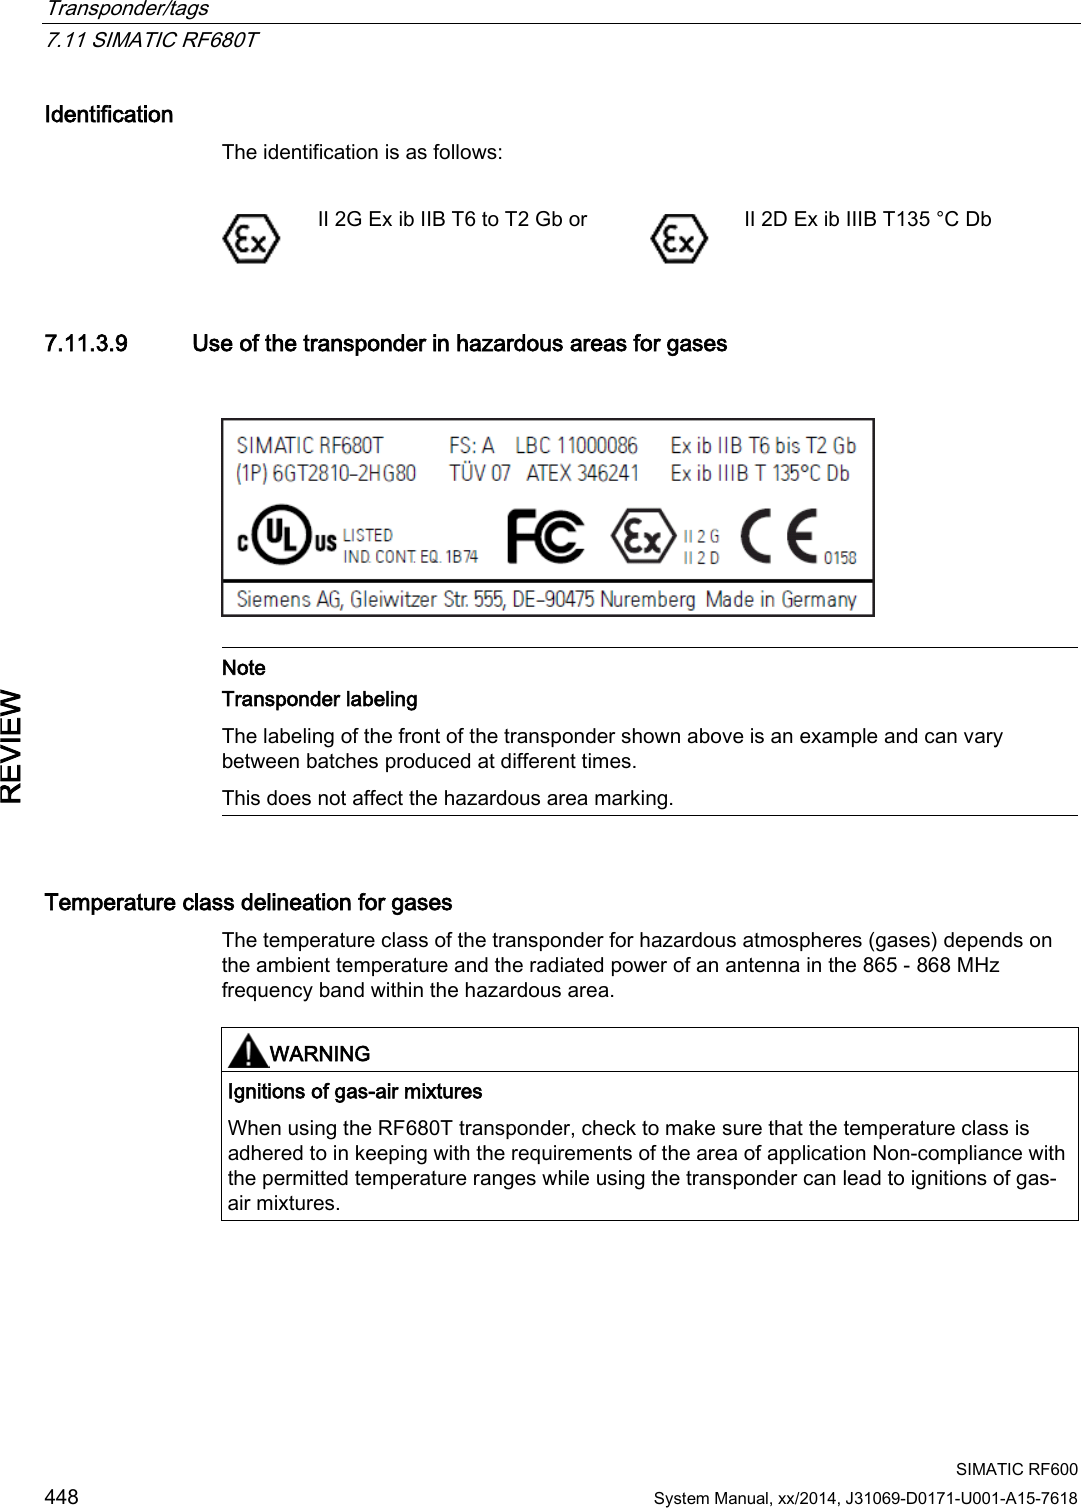 Transponder/tags   7.11 SIMATIC RF680T  SIMATIC RF600 448 System Manual, xx/2014, J31069-D0171-U001-A15-7618 REVIEW Identification The identification is as follows:   II 2G Ex ib IIB T6 to T2 Gb or  II 2D Ex ib IIIB T135 °C Db 7.11.3.9 Use of the transponder in hazardous areas for gases     Note Transponder labeling The labeling of the front of the transponder shown above is an example and can vary between batches produced at different times.  This does not affect the hazardous area marking.  Temperature class delineation for gases The temperature class of the transponder for hazardous atmospheres (gases) depends on the ambient temperature and the radiated power of an antenna in the 865 - 868 MHz frequency band within the hazardous area.    WARNING Ignitions of gas-air mixtures When using the RF680T transponder, check to make sure that the temperature class is adhered to in keeping with the requirements of the area of application Non-compliance with the permitted temperature ranges while using the transponder can lead to ignitions of gas-air mixtures.  